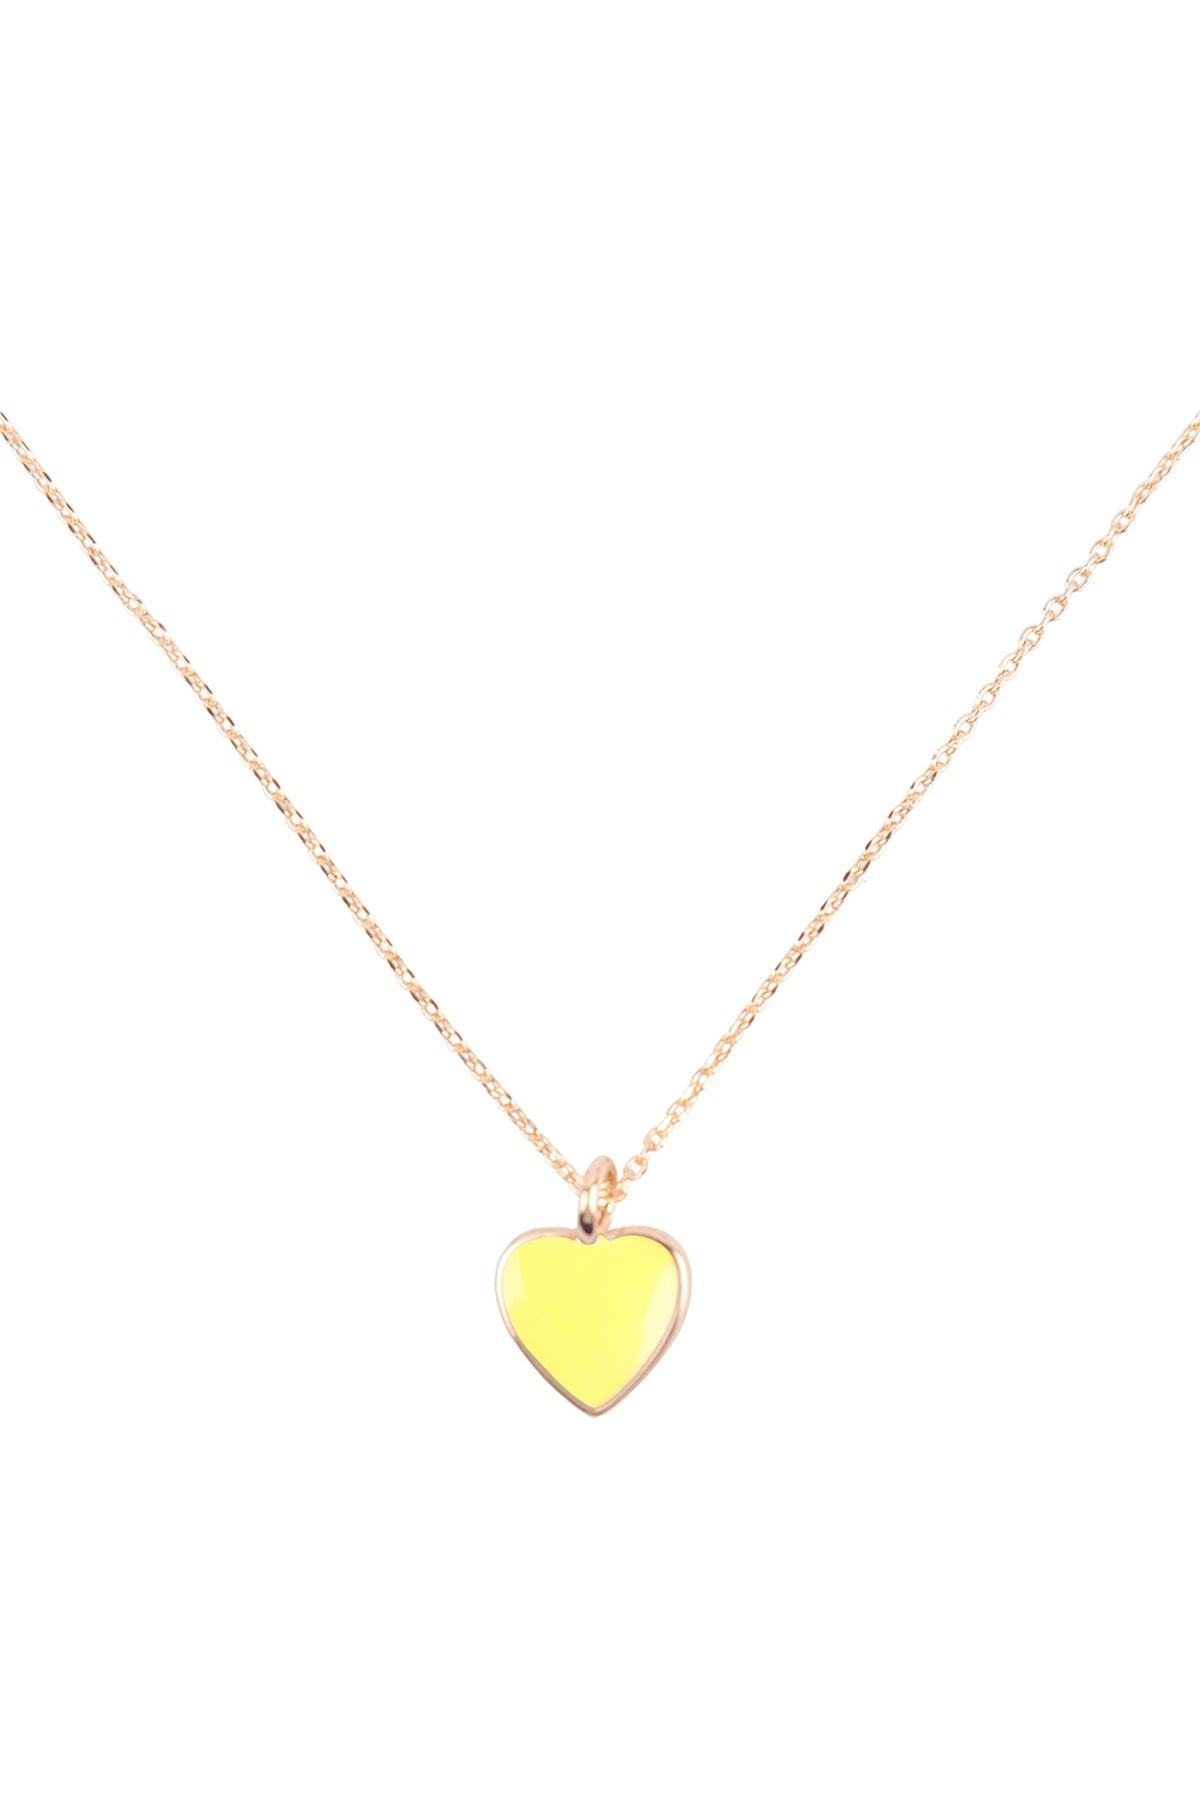 HEART COLOR RESIN CHARM PENDANT NECKLACE